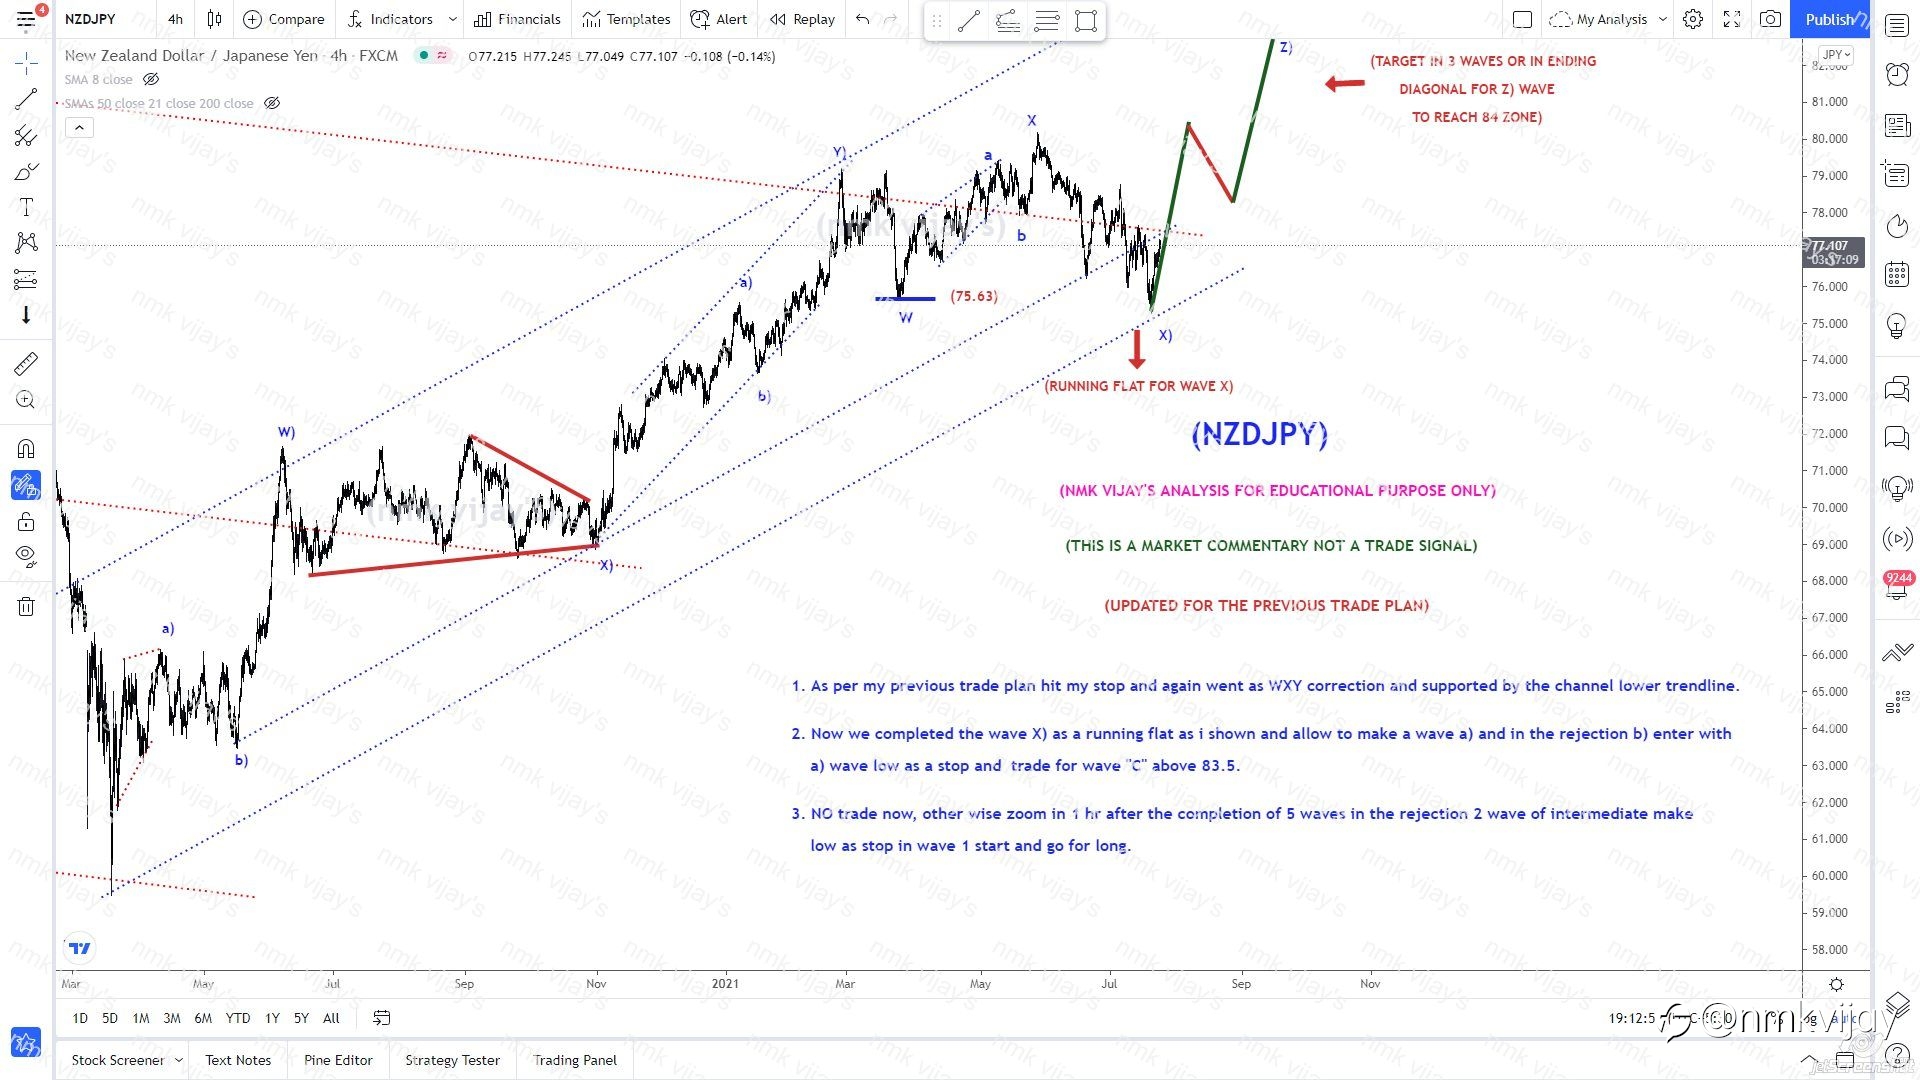 NZDJPY-Target above 83.5 in 3 waves and explained how to trade..